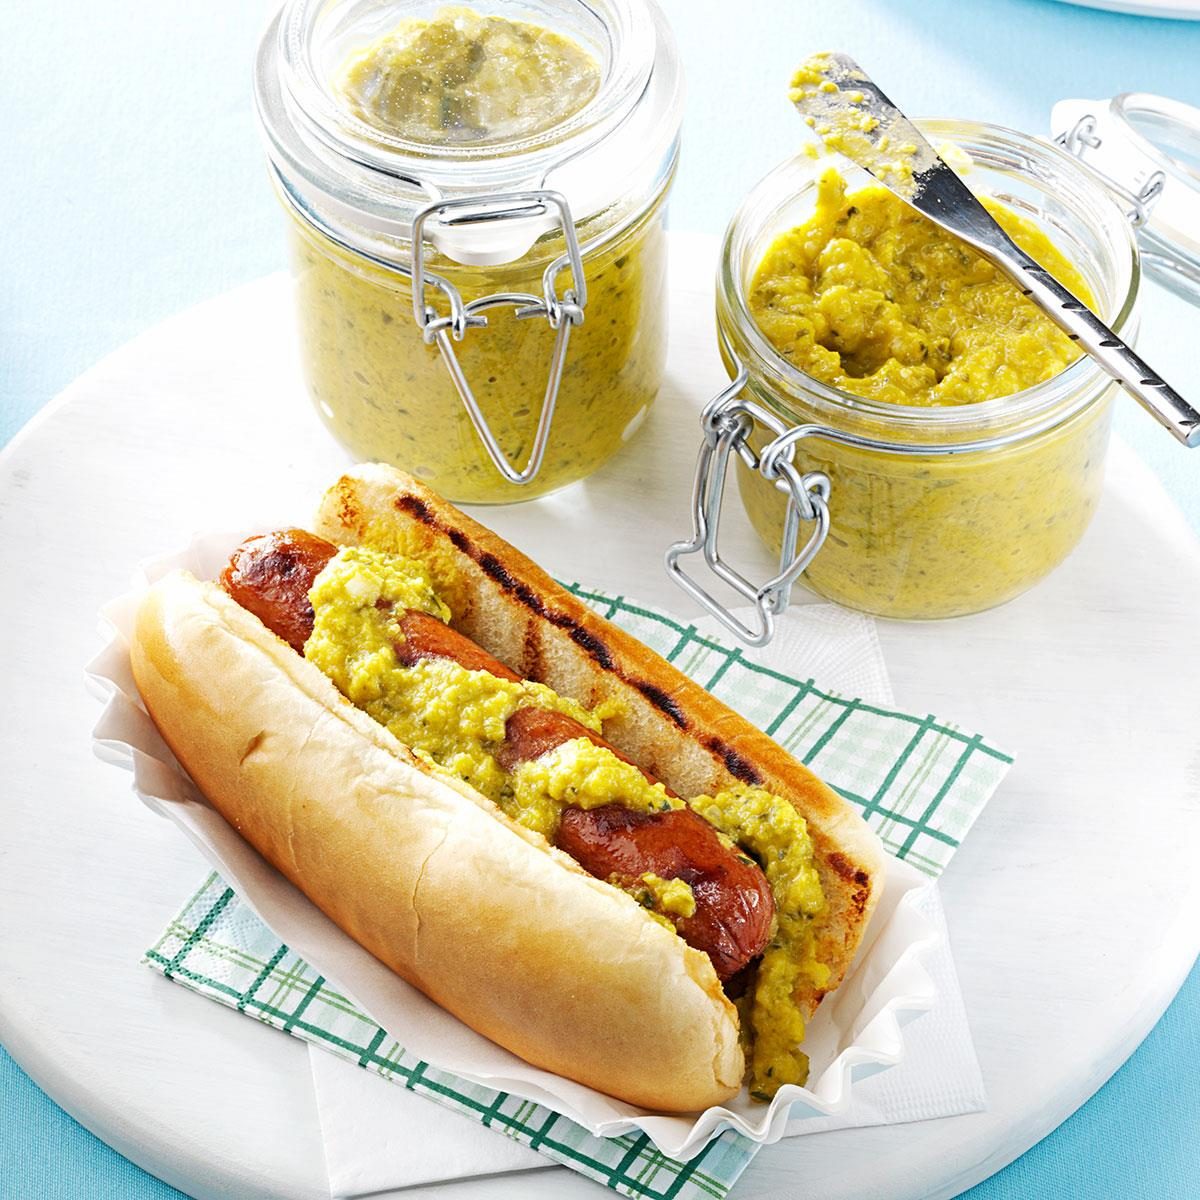 South Liberty Hall Relish Recipe: How to Make It